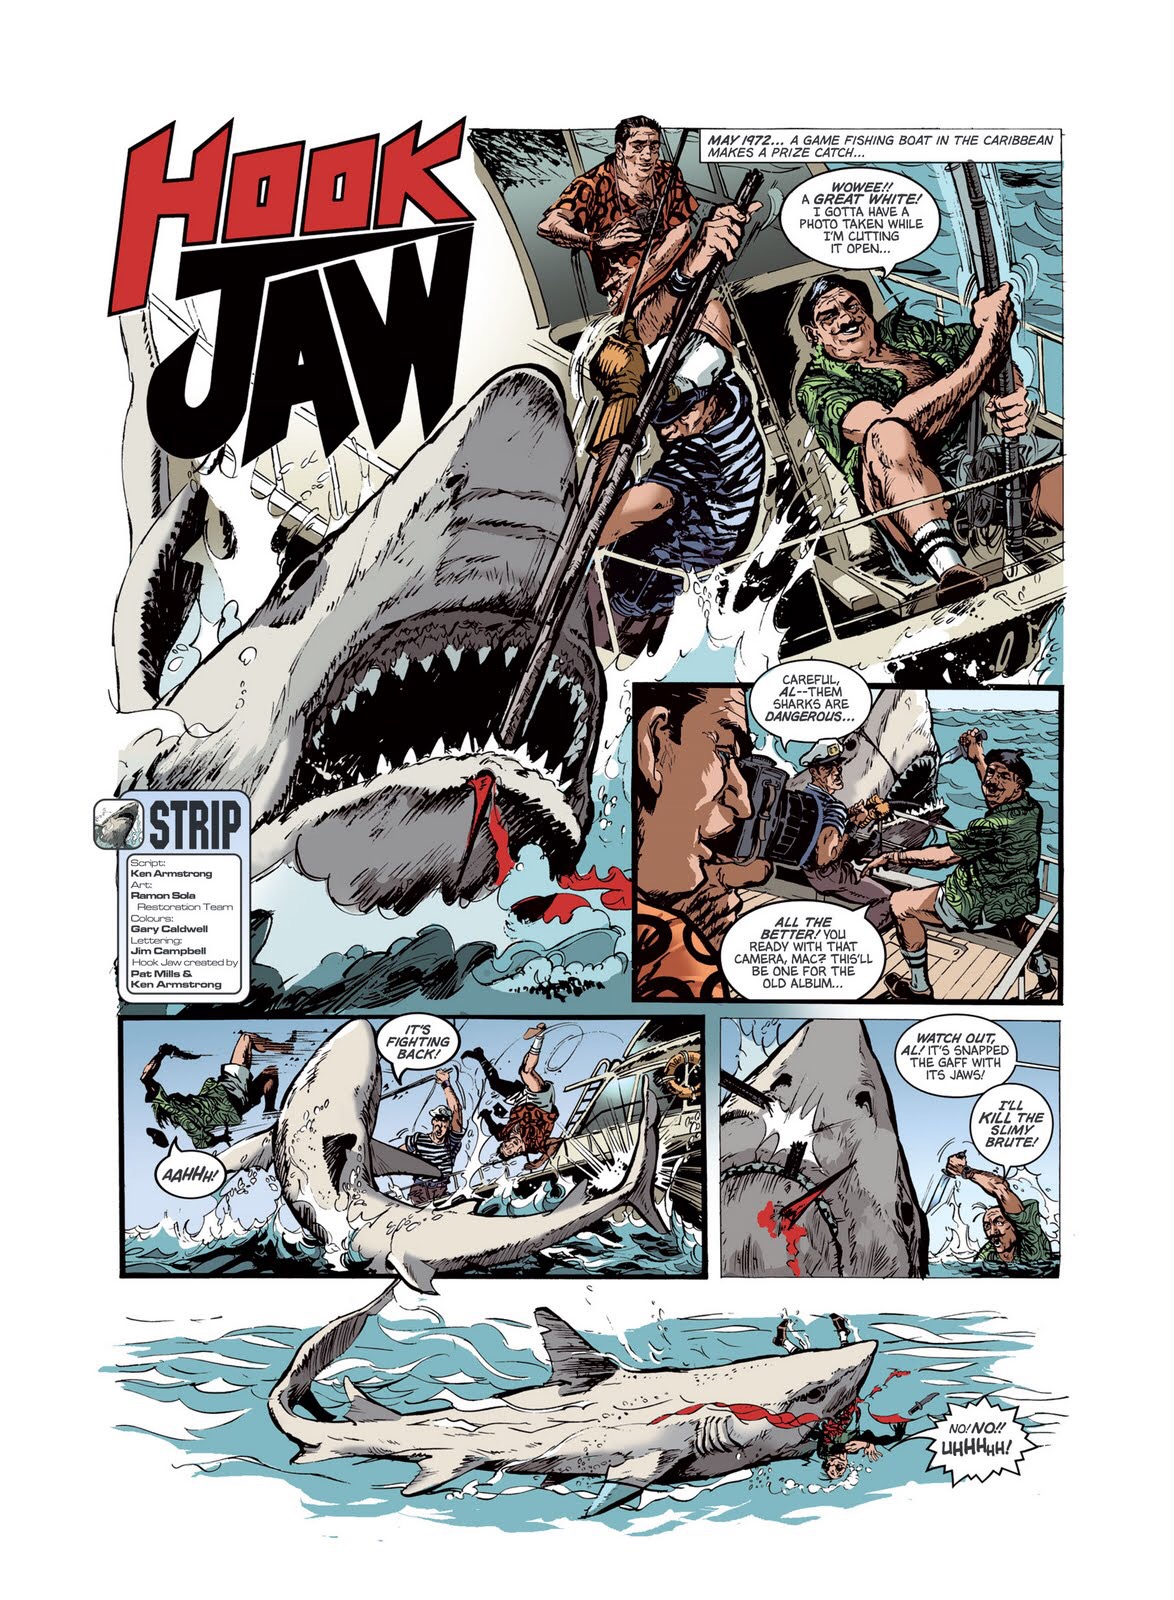 Hook Jaw is back – and Titan Comics has snagged him